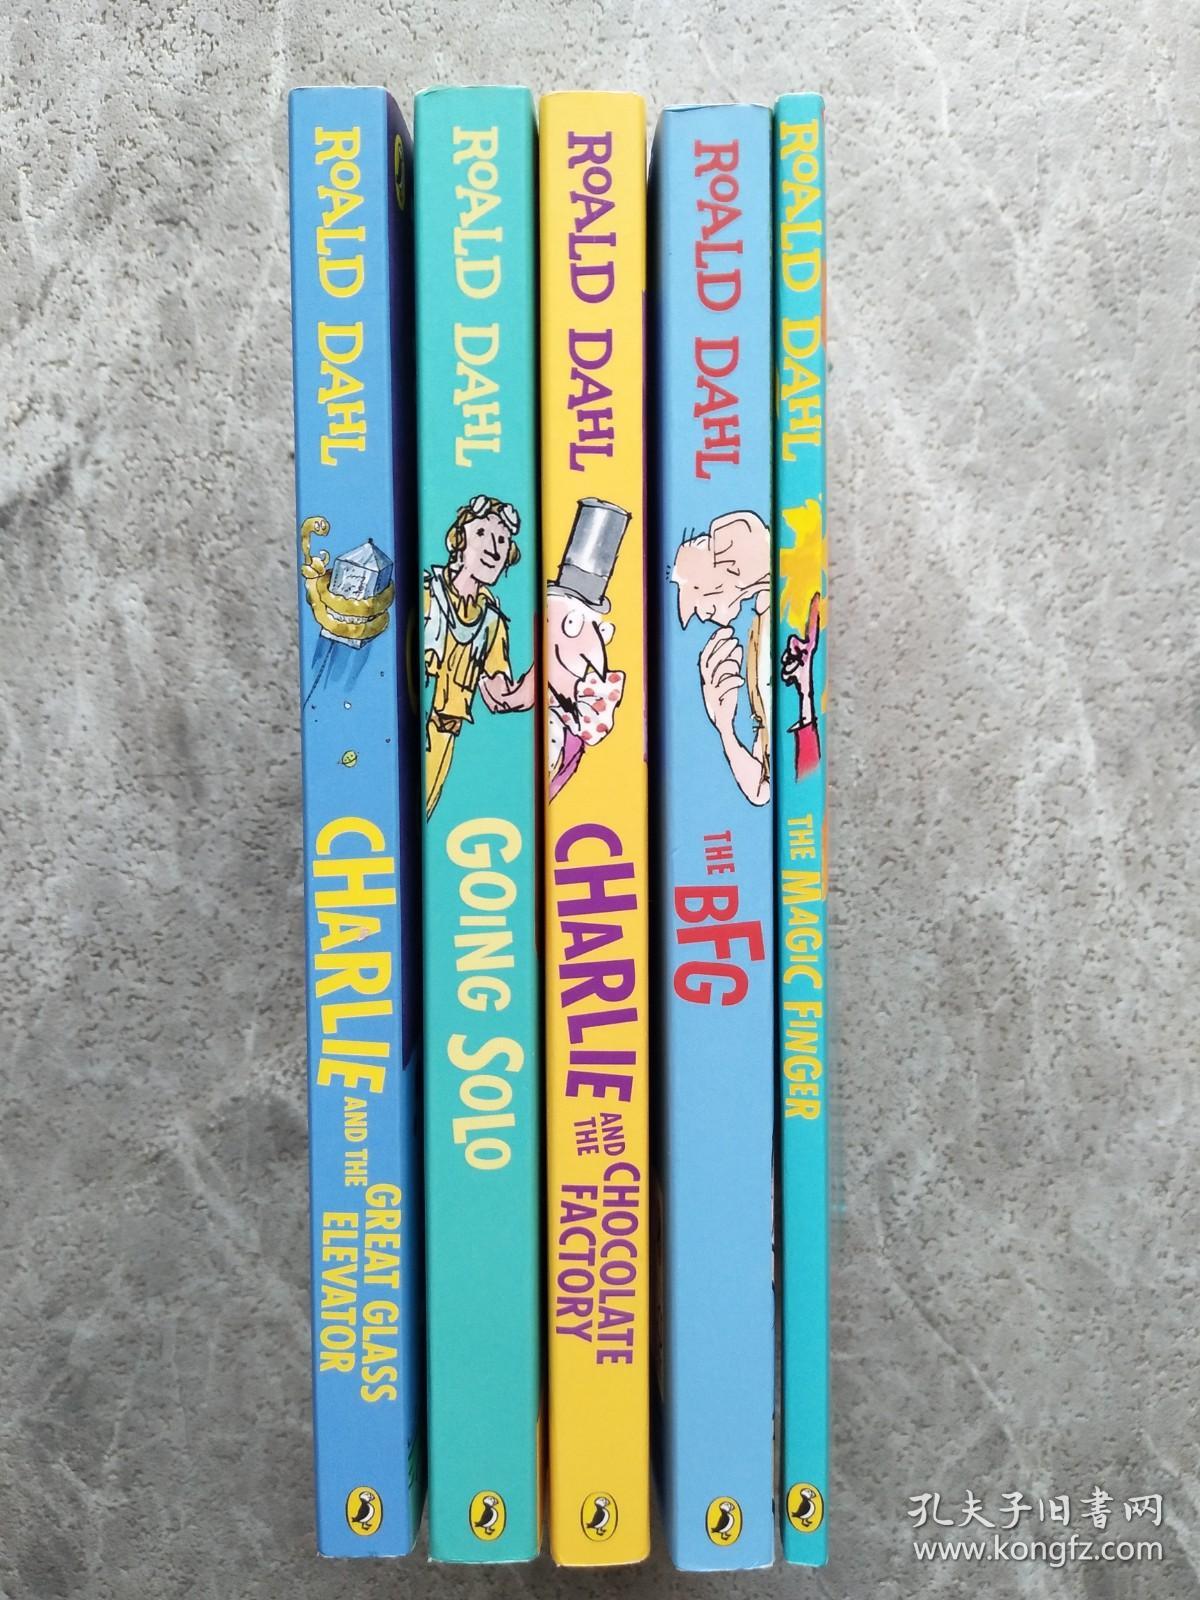 ROALD DAHL:CHARLIE AND THE GREAT GLASS ELEVATOR、GOING SOLO、CHARLIE AND THE GHOCOLATE FACTORY、THE BFG、THE MAGIC FINGER